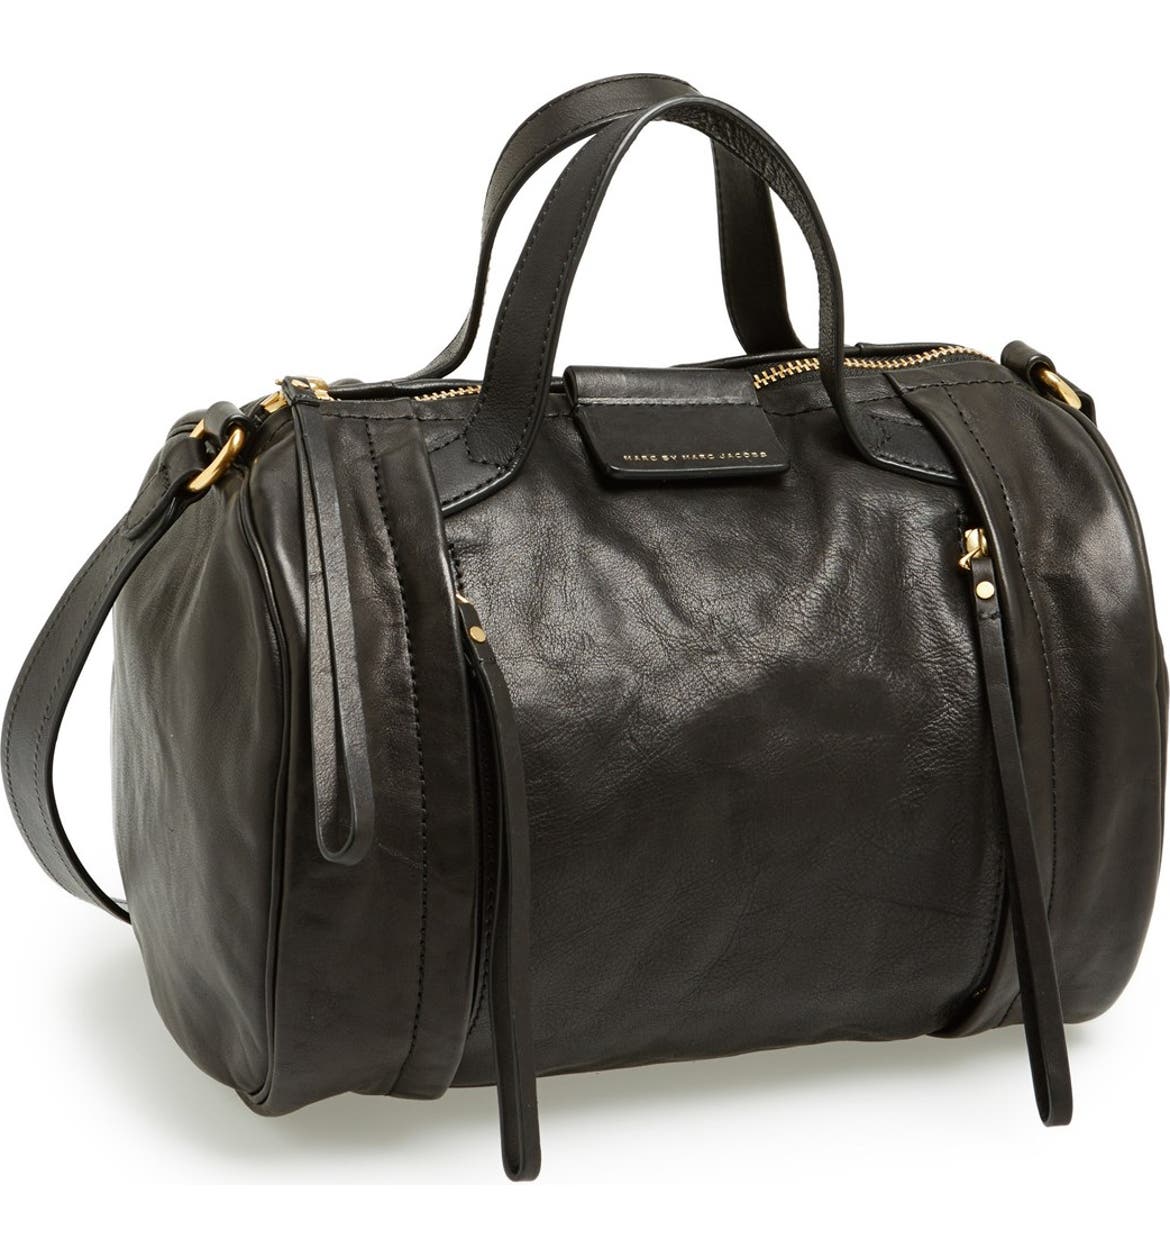 MARC BY MARC JACOBS Moto Duffel Bag | Nordstrom